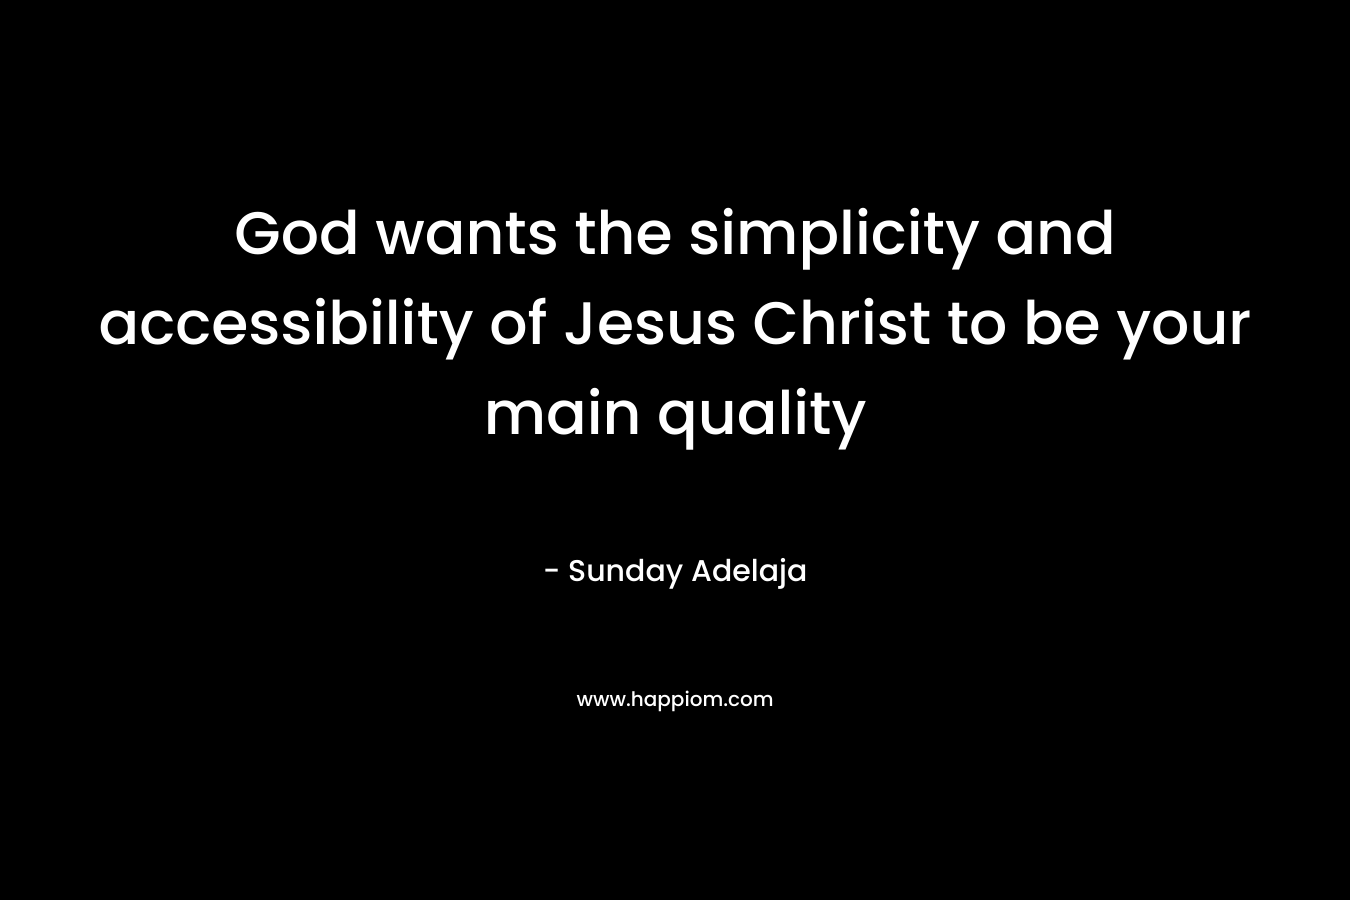 God wants the simplicity and accessibility of Jesus Christ to be your main quality